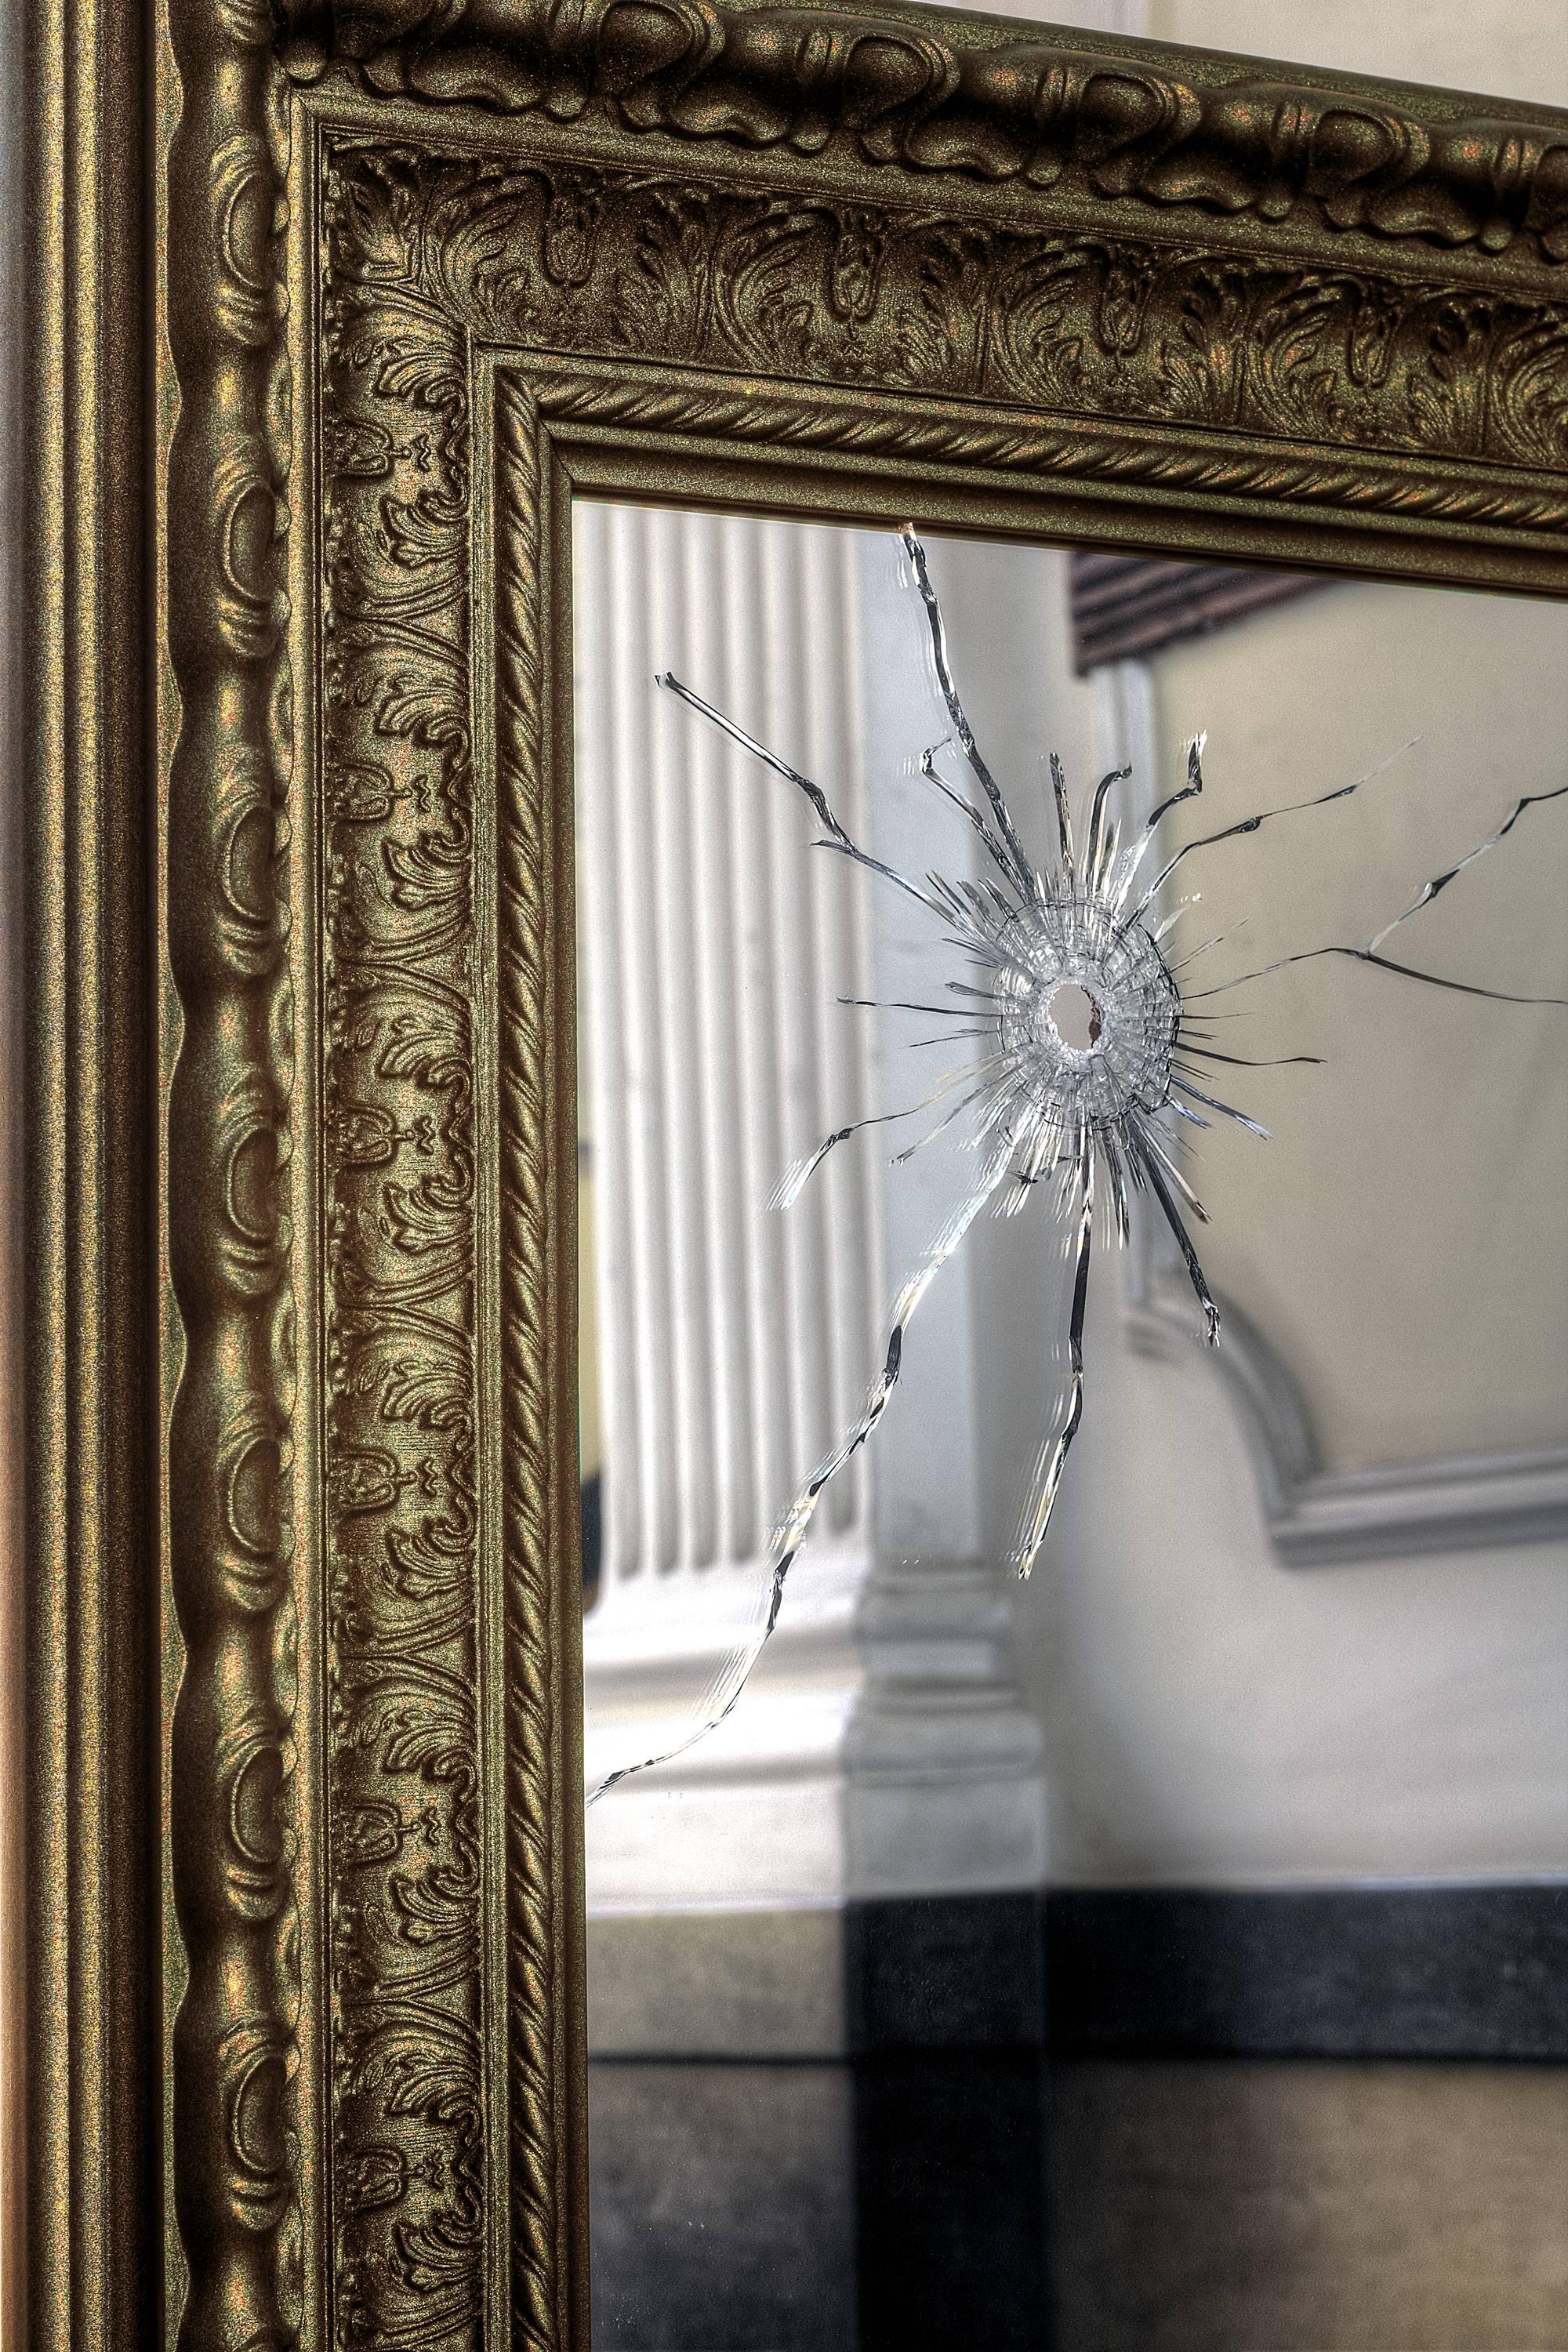 The 'Seven Years' wall mirror is made of security-glass, mirror hit by gunshots and gold wooden frame. 

Mirror dimension: L 180 x W 105 cm. Dimensions are customizable.

Limited Edition of 15.

Each mirror is hand signed and numbered by the artists